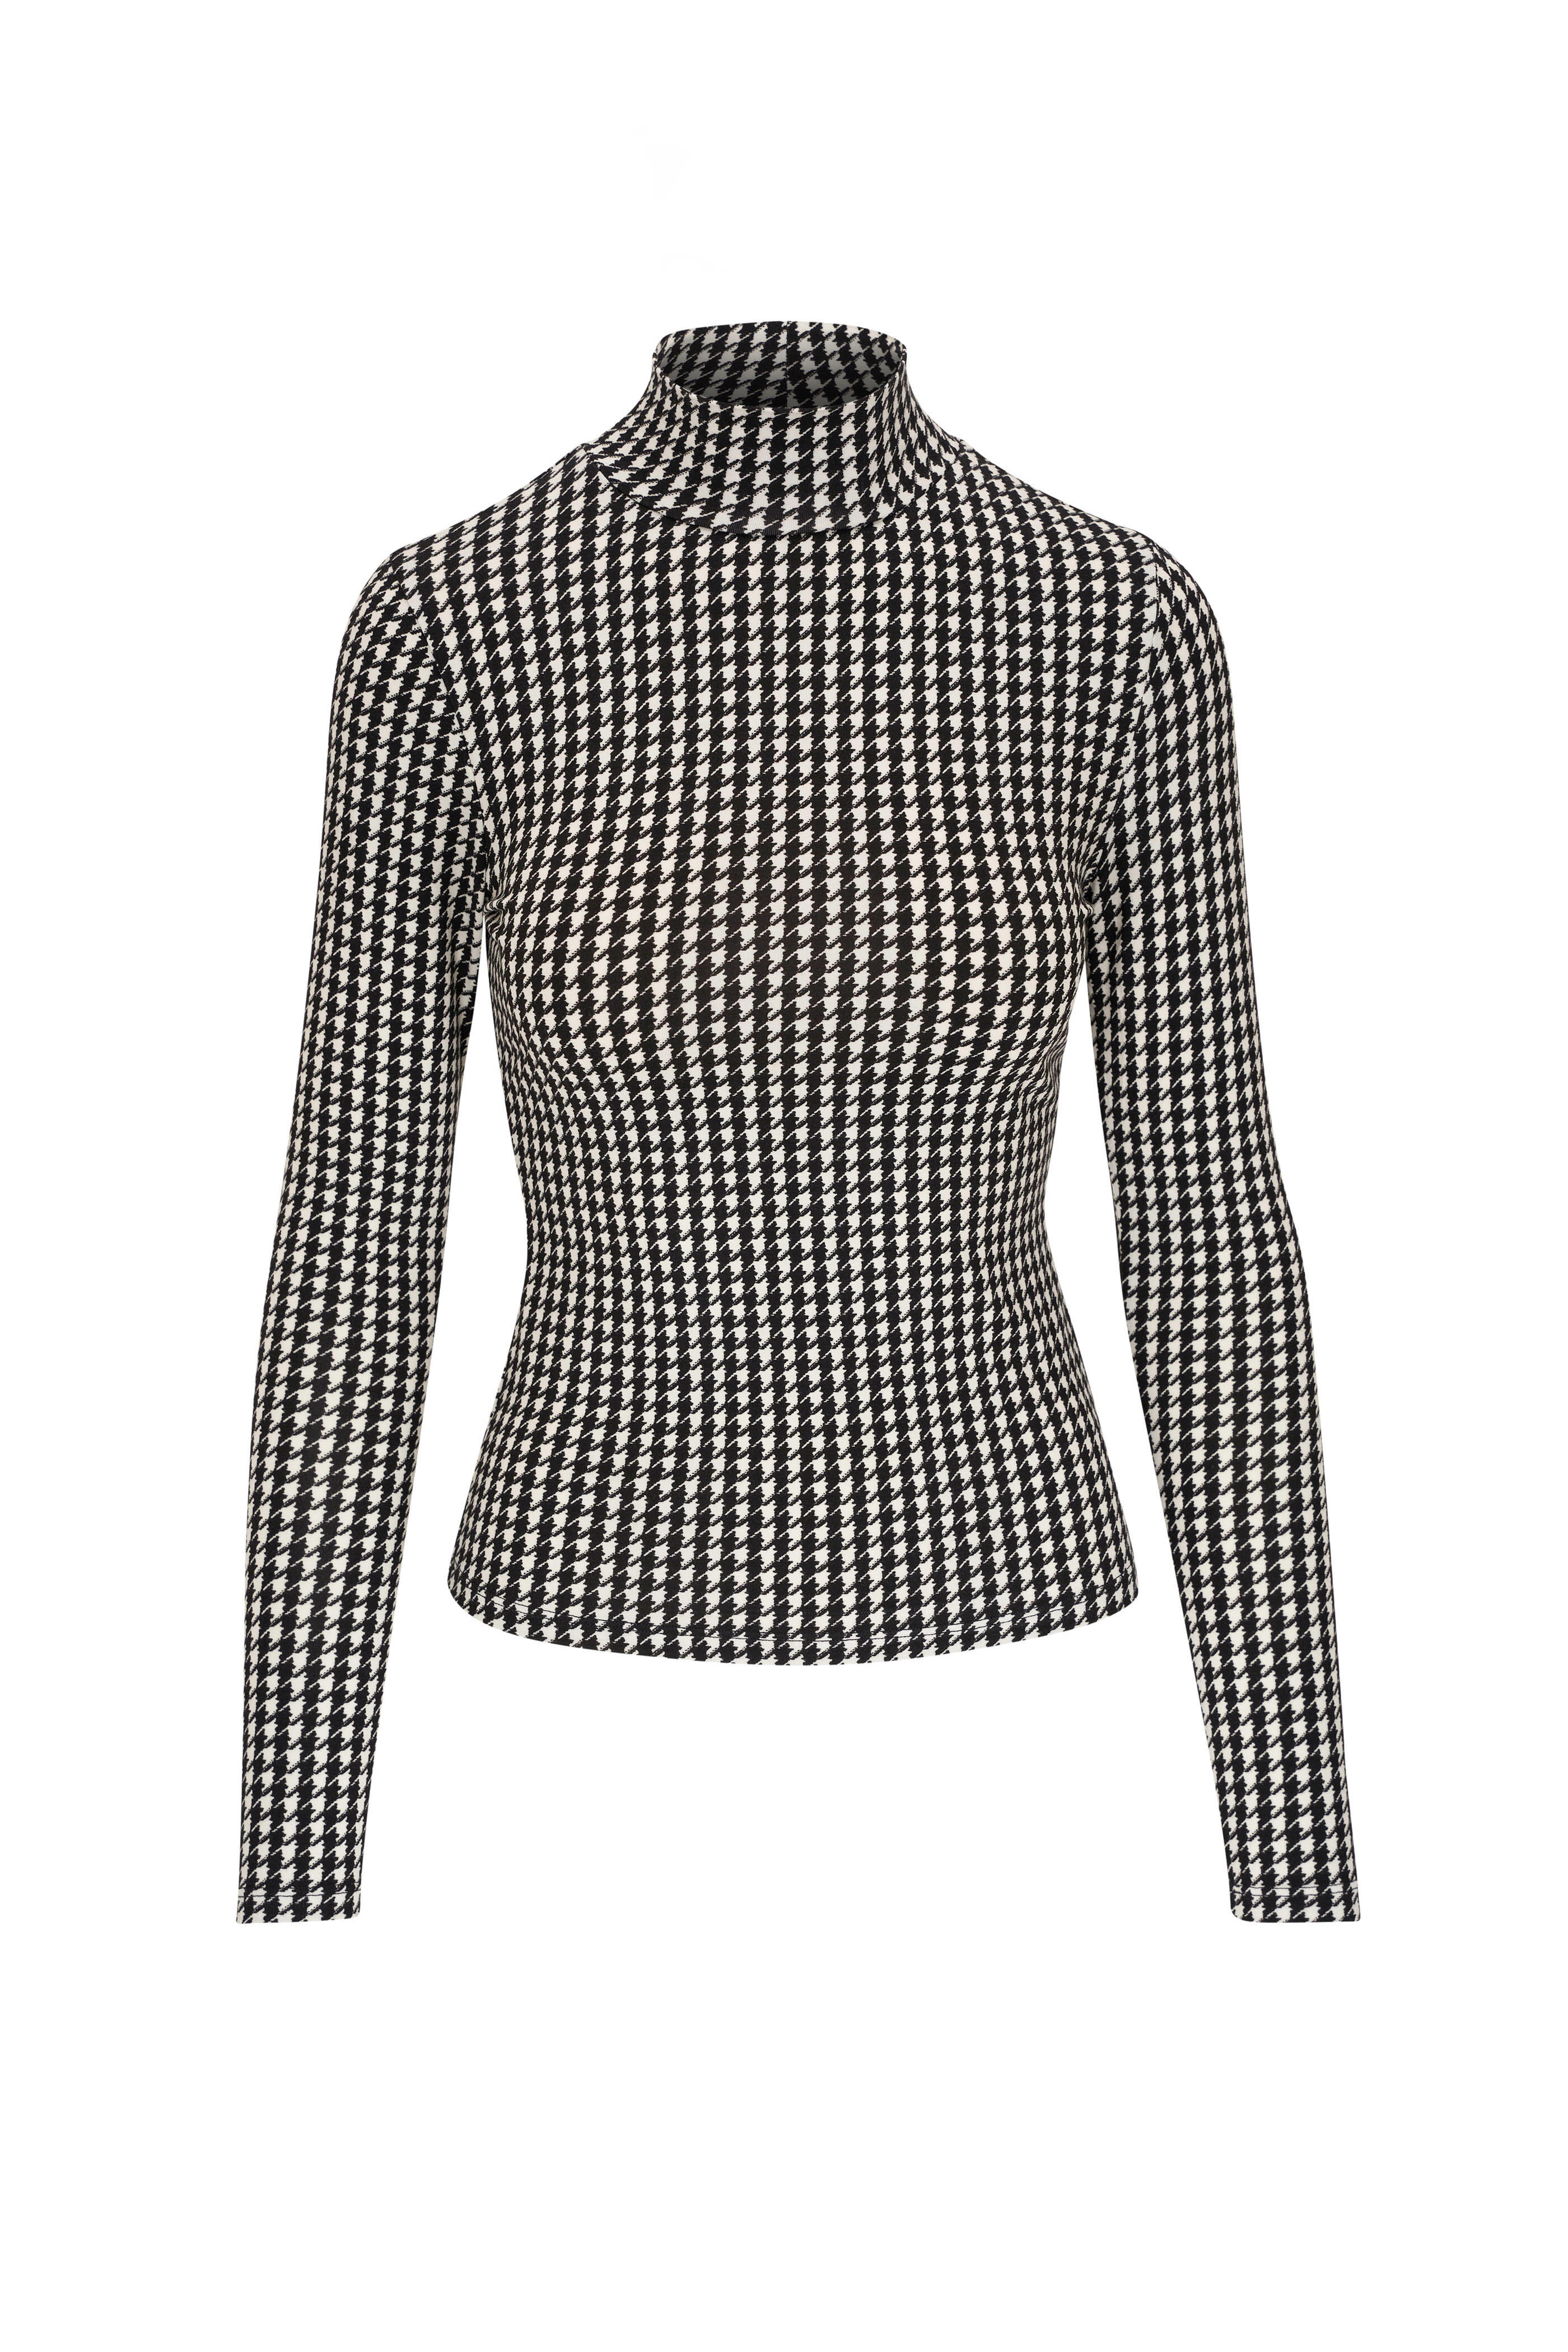 Veronica Beard - Nate Black & Off-White Houndstooth Top